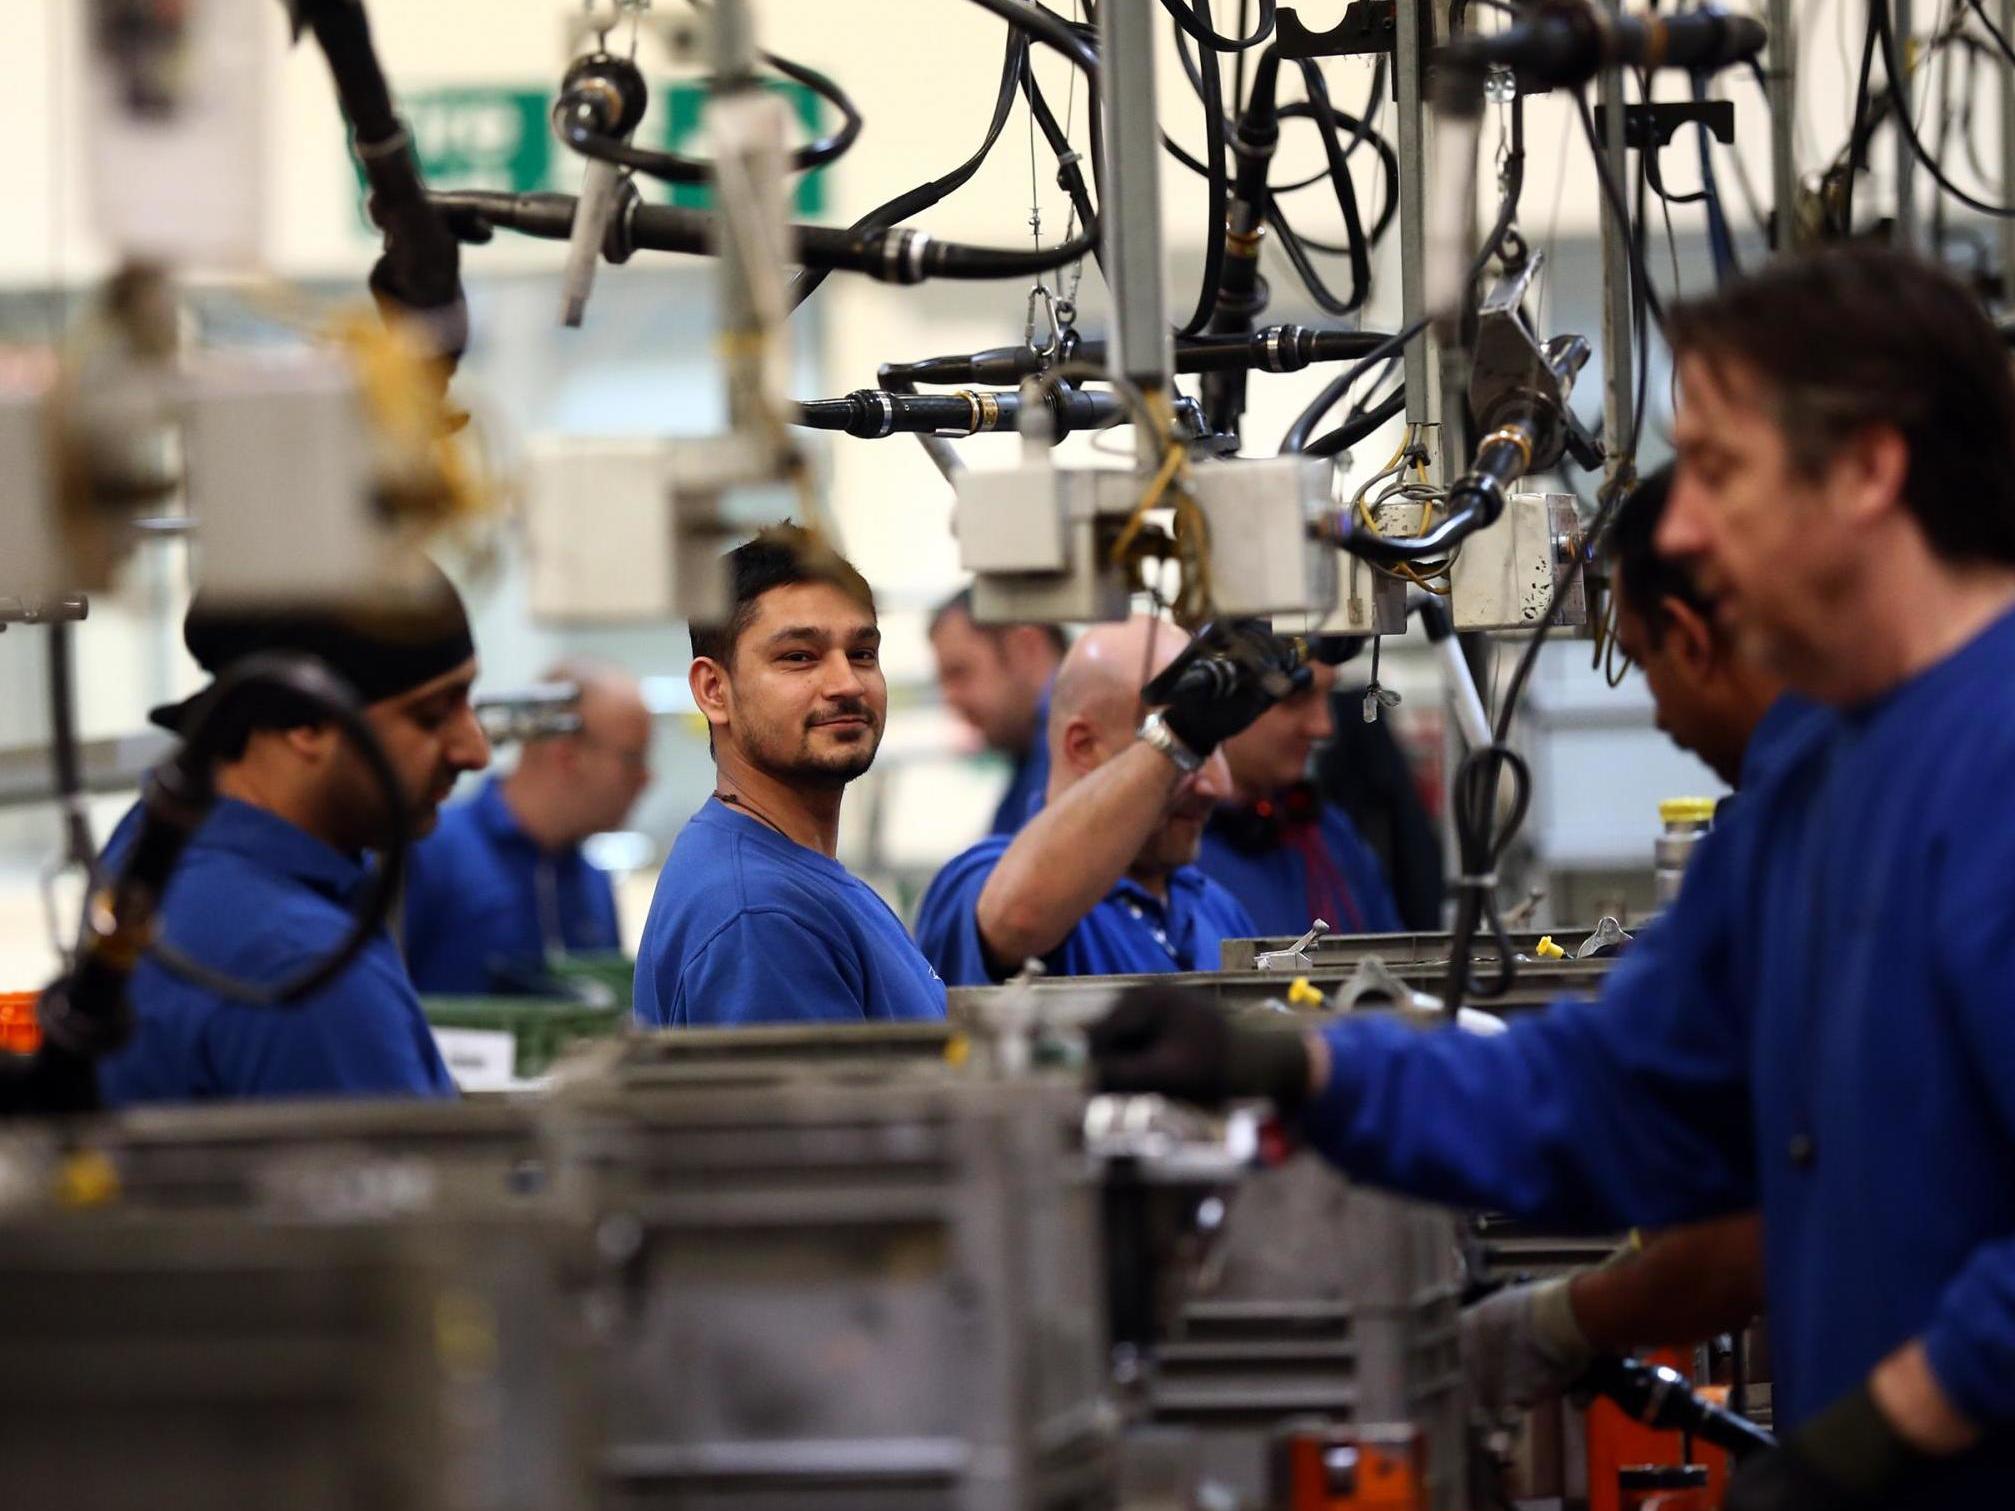 An employee works on an engine production line at a Ford factory on 13 January, 2015 in Dagenham, England